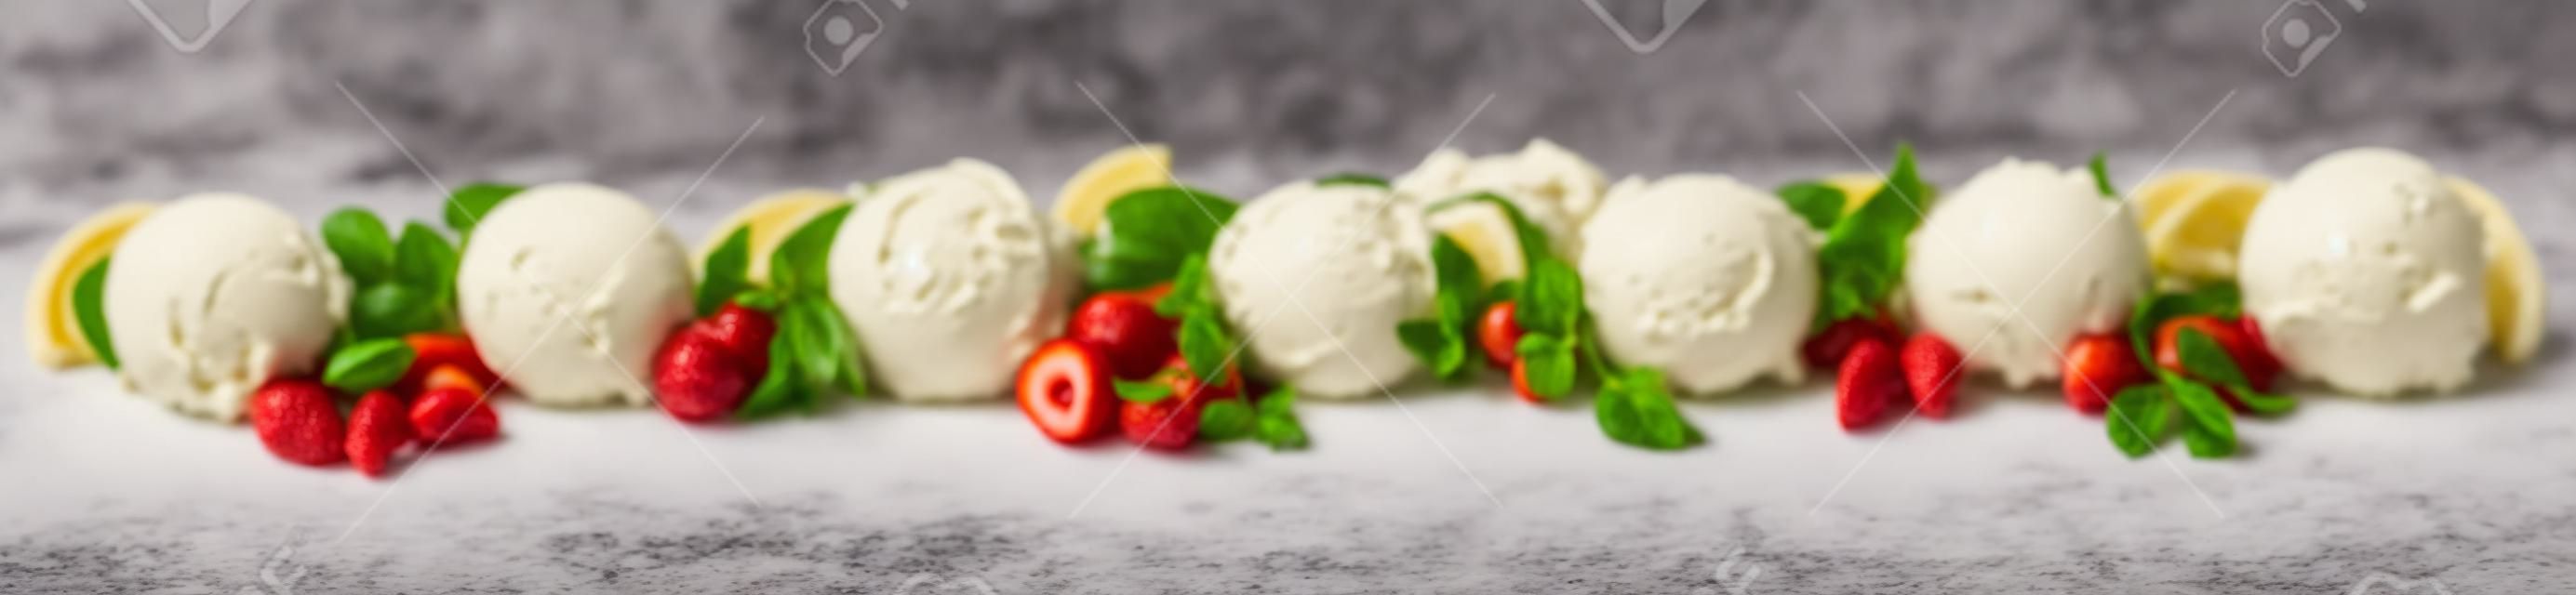 Wide panorama banner with a variety of Italian ice cream desserts with assorted fruit flavors, vanilla, chocolate and almond displayed as a line of scoops with fresh ingredients on white